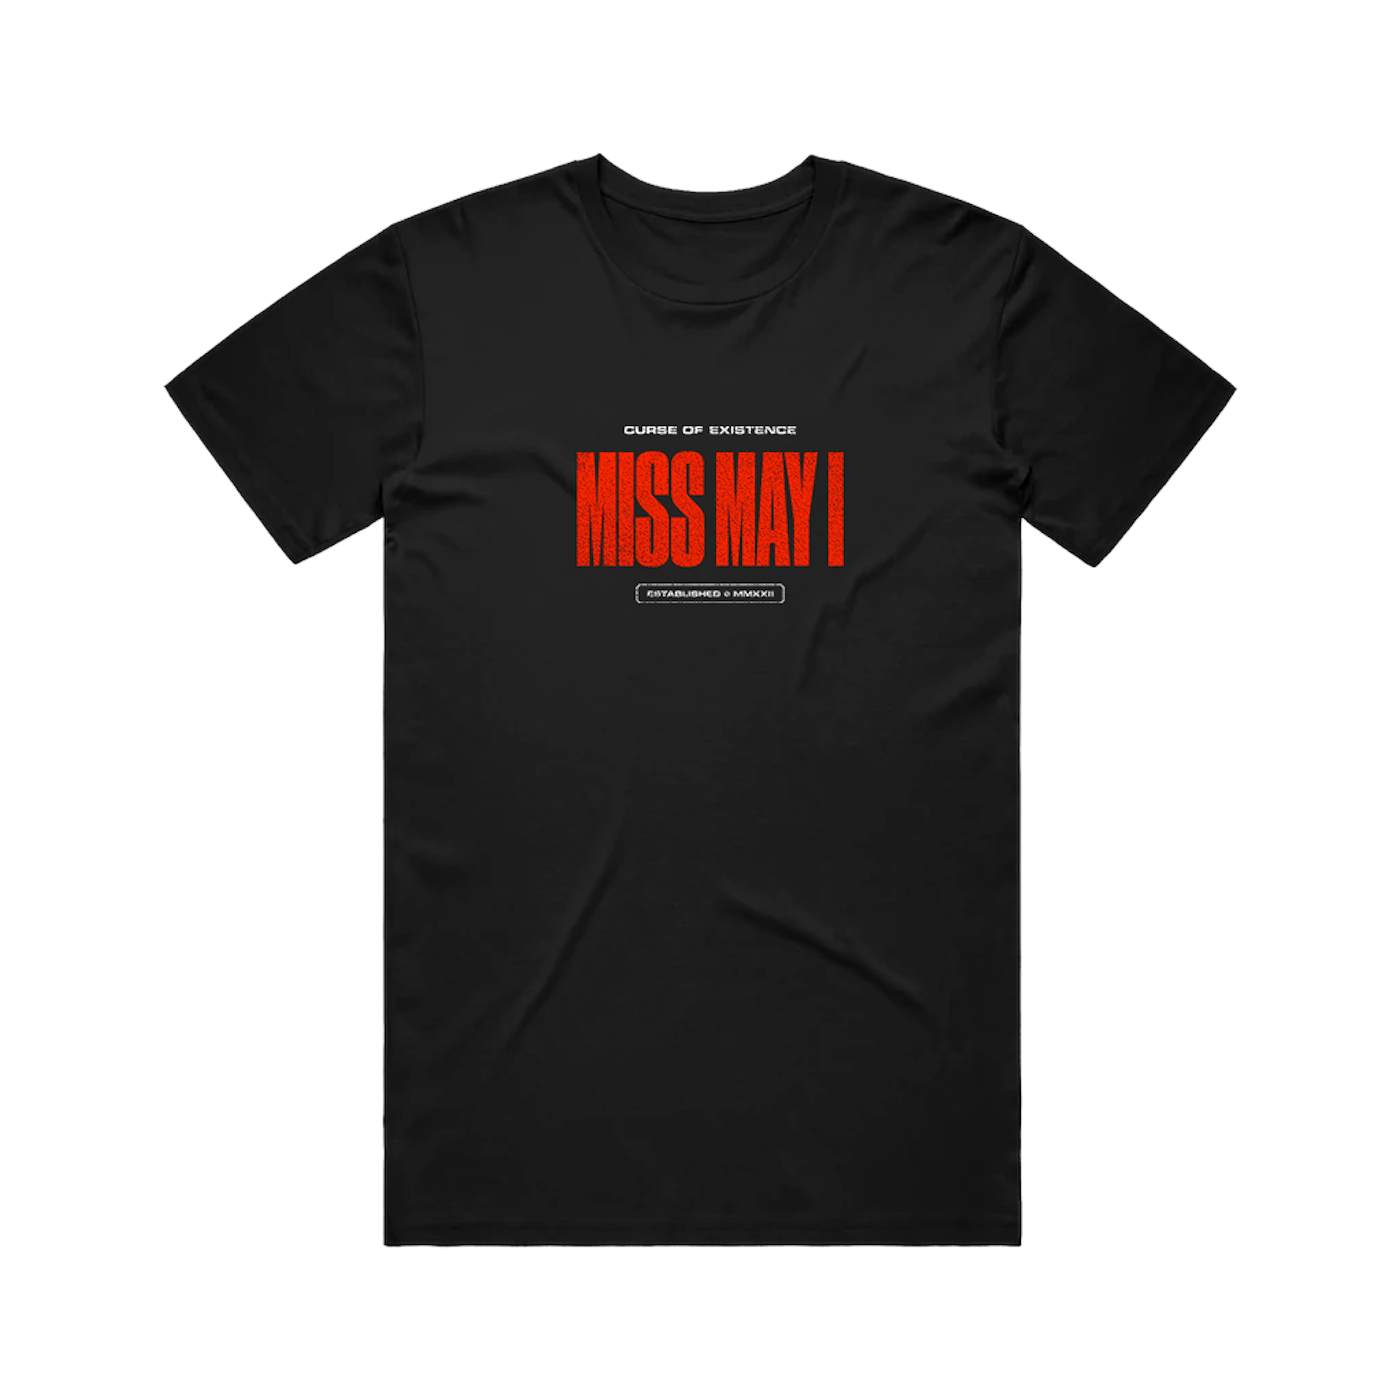 Miss May I - Curse of Existence Tee